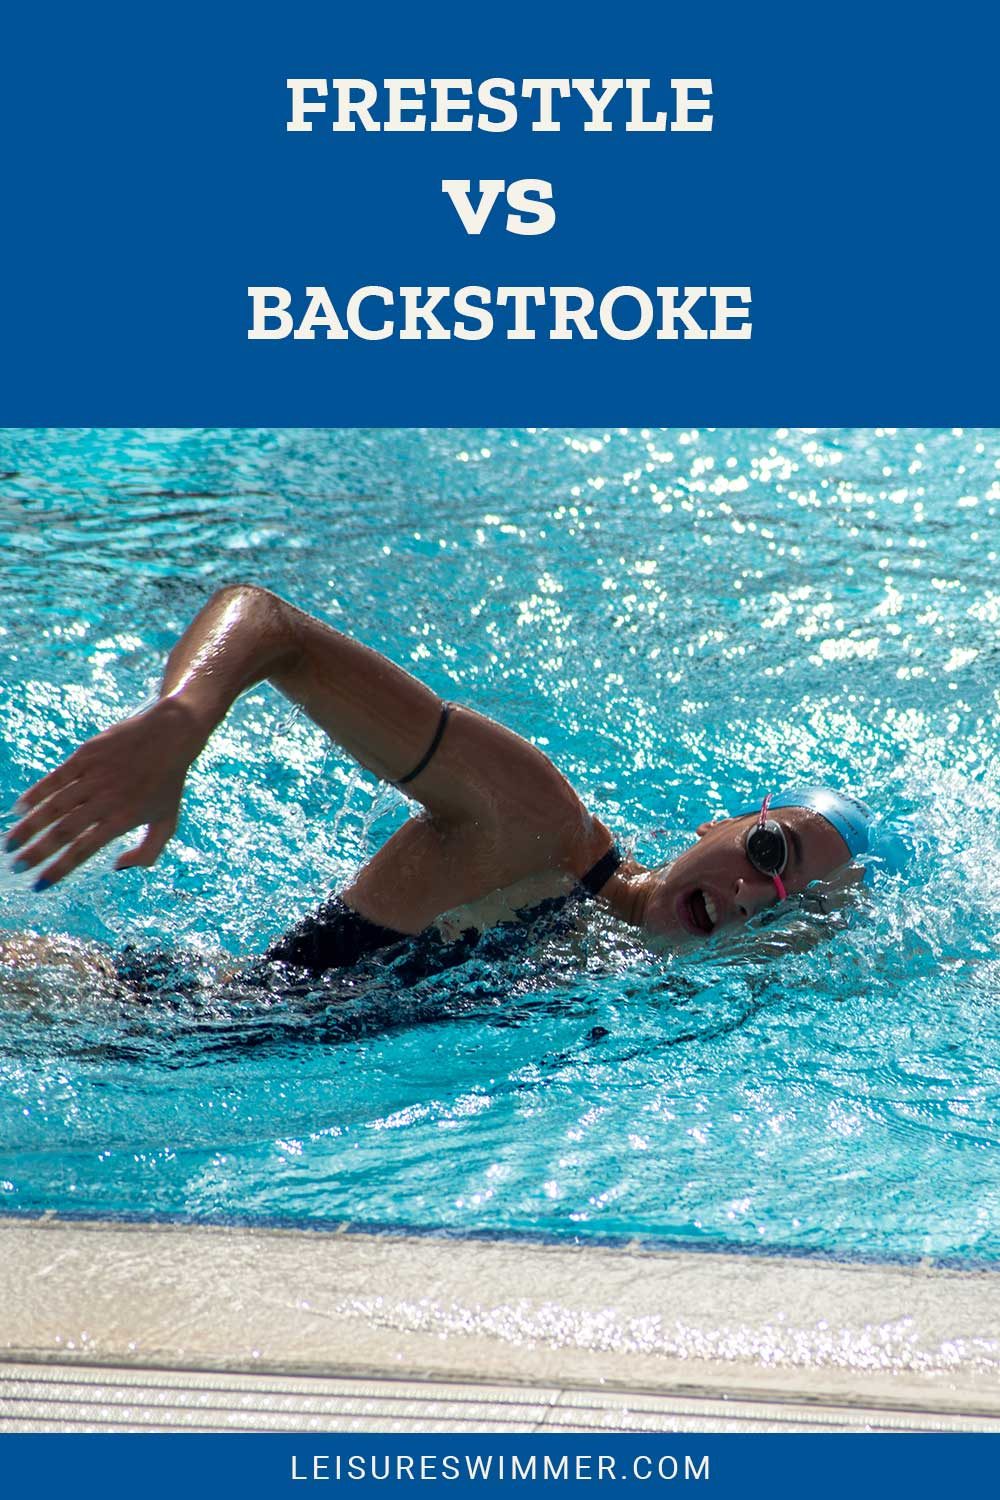 Woman with blue swimming cap swimming in a pool - Freestyle vs. Backstroke.